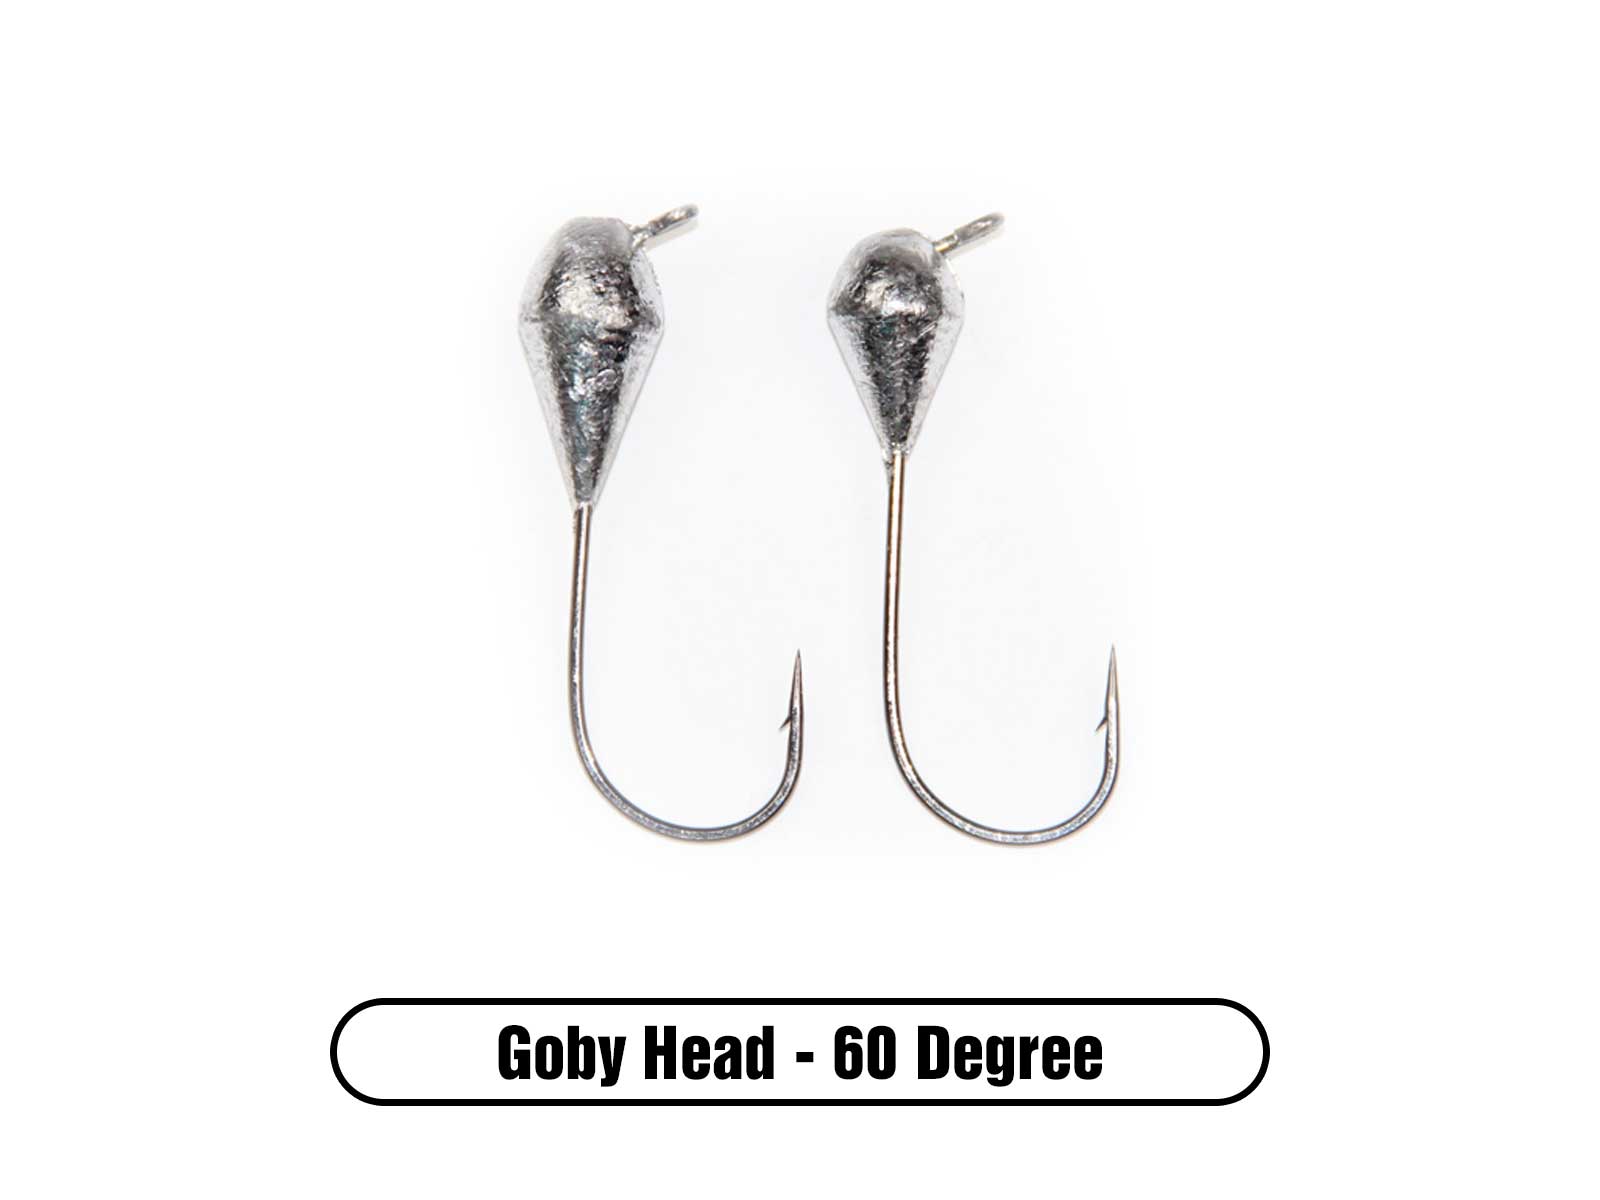 Lead Goby Tube Jig Head 60 Degree Line Tie for Largemouth Bass Fishing, Smallmouth Bass Fishing and Walleye Fishing Lure